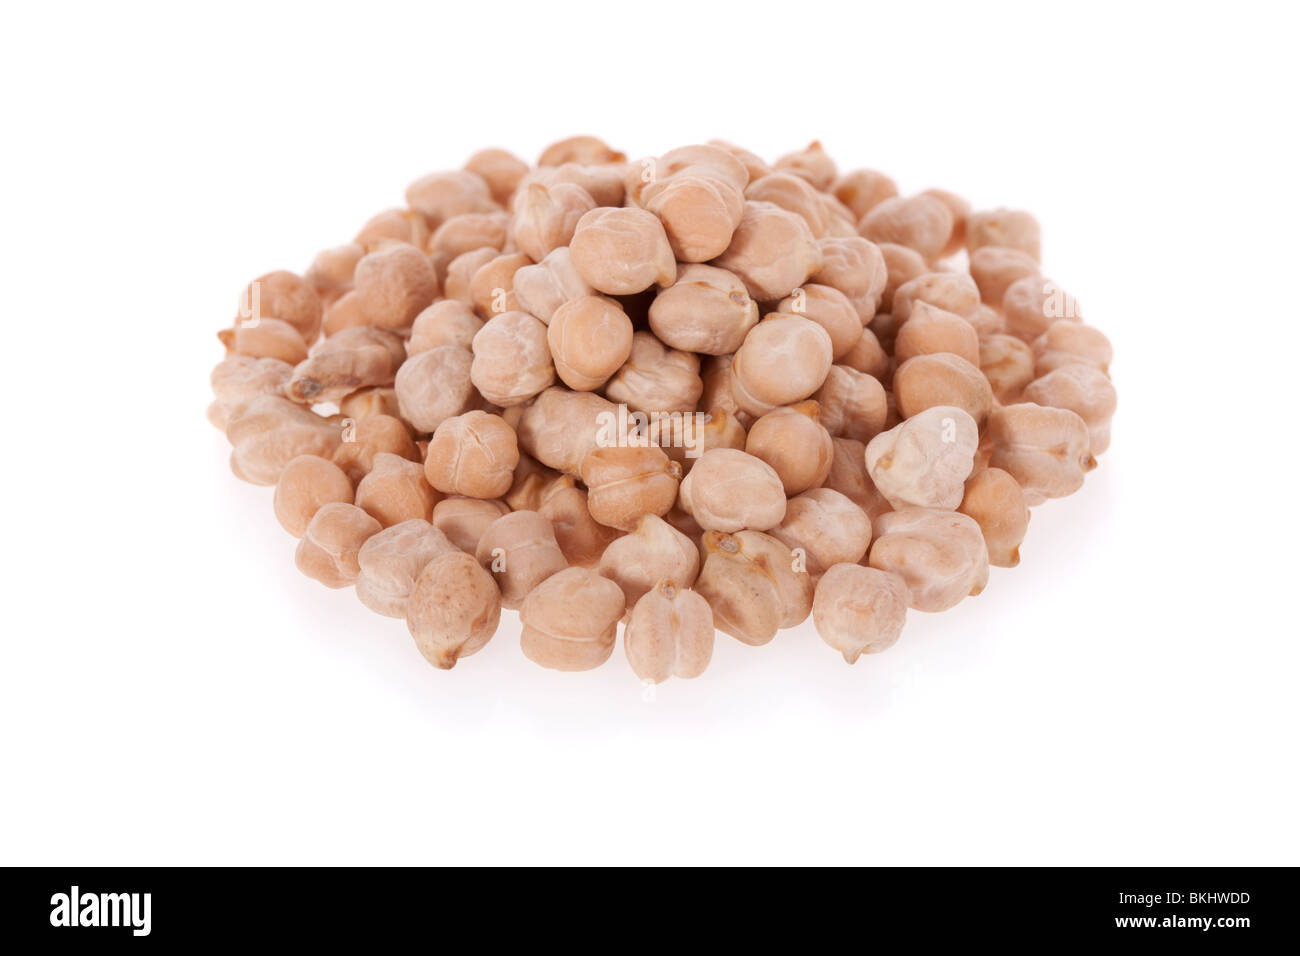 White chickpeas isolated on a white background Stock Photo